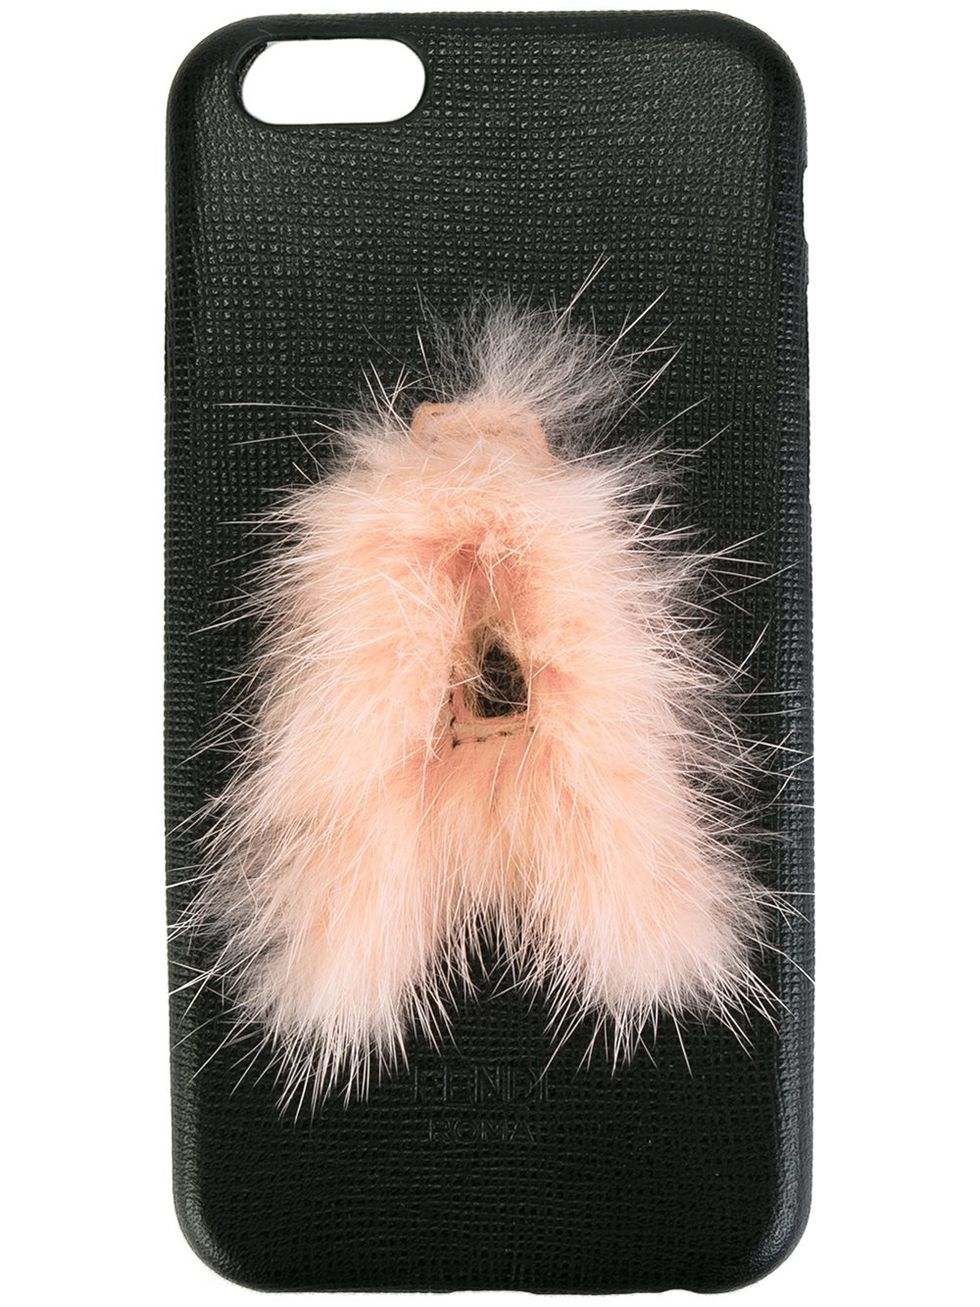 Fur, Feather, Mobile phone case, Technology, Electronic device, Mobile phone accessories, Gadget, Mobile phone, 